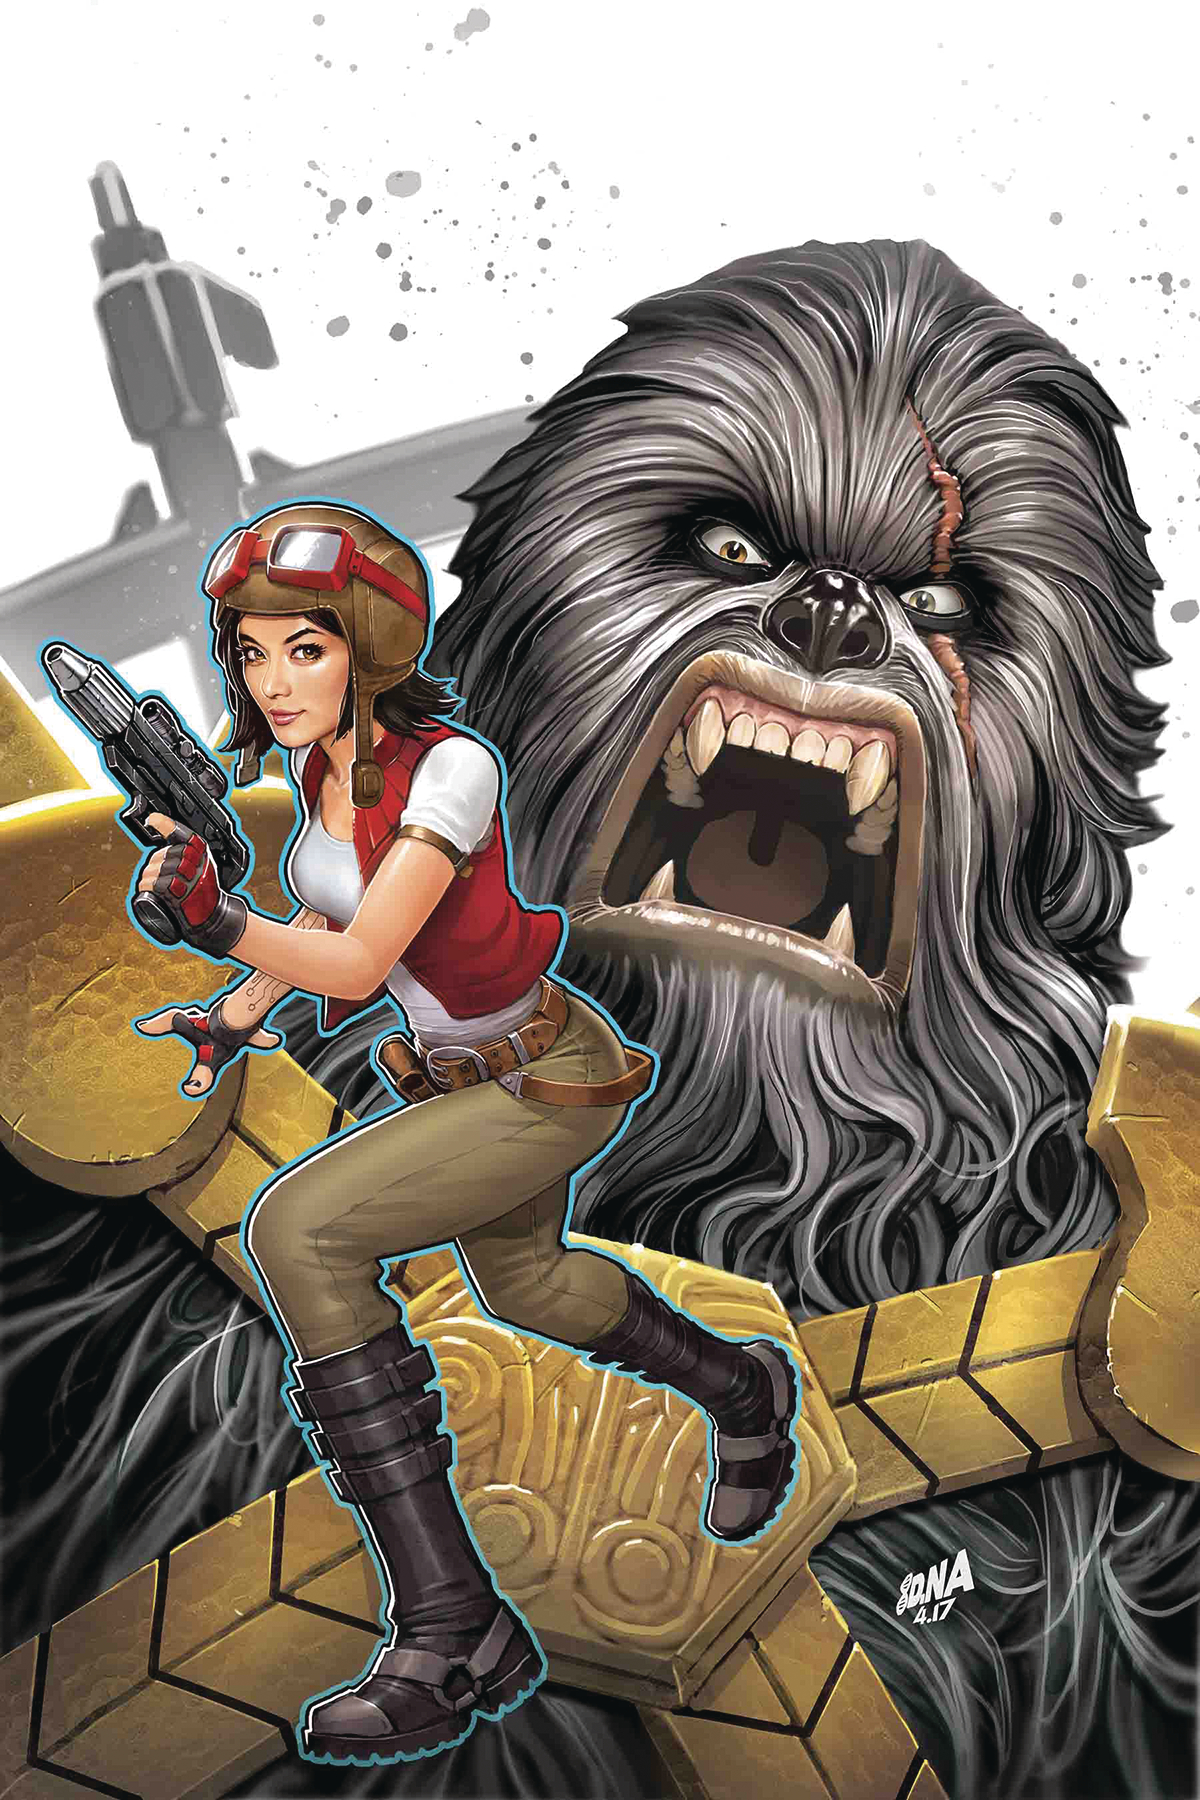 STAR WARS DOCTOR APHRA ANNUAL #1